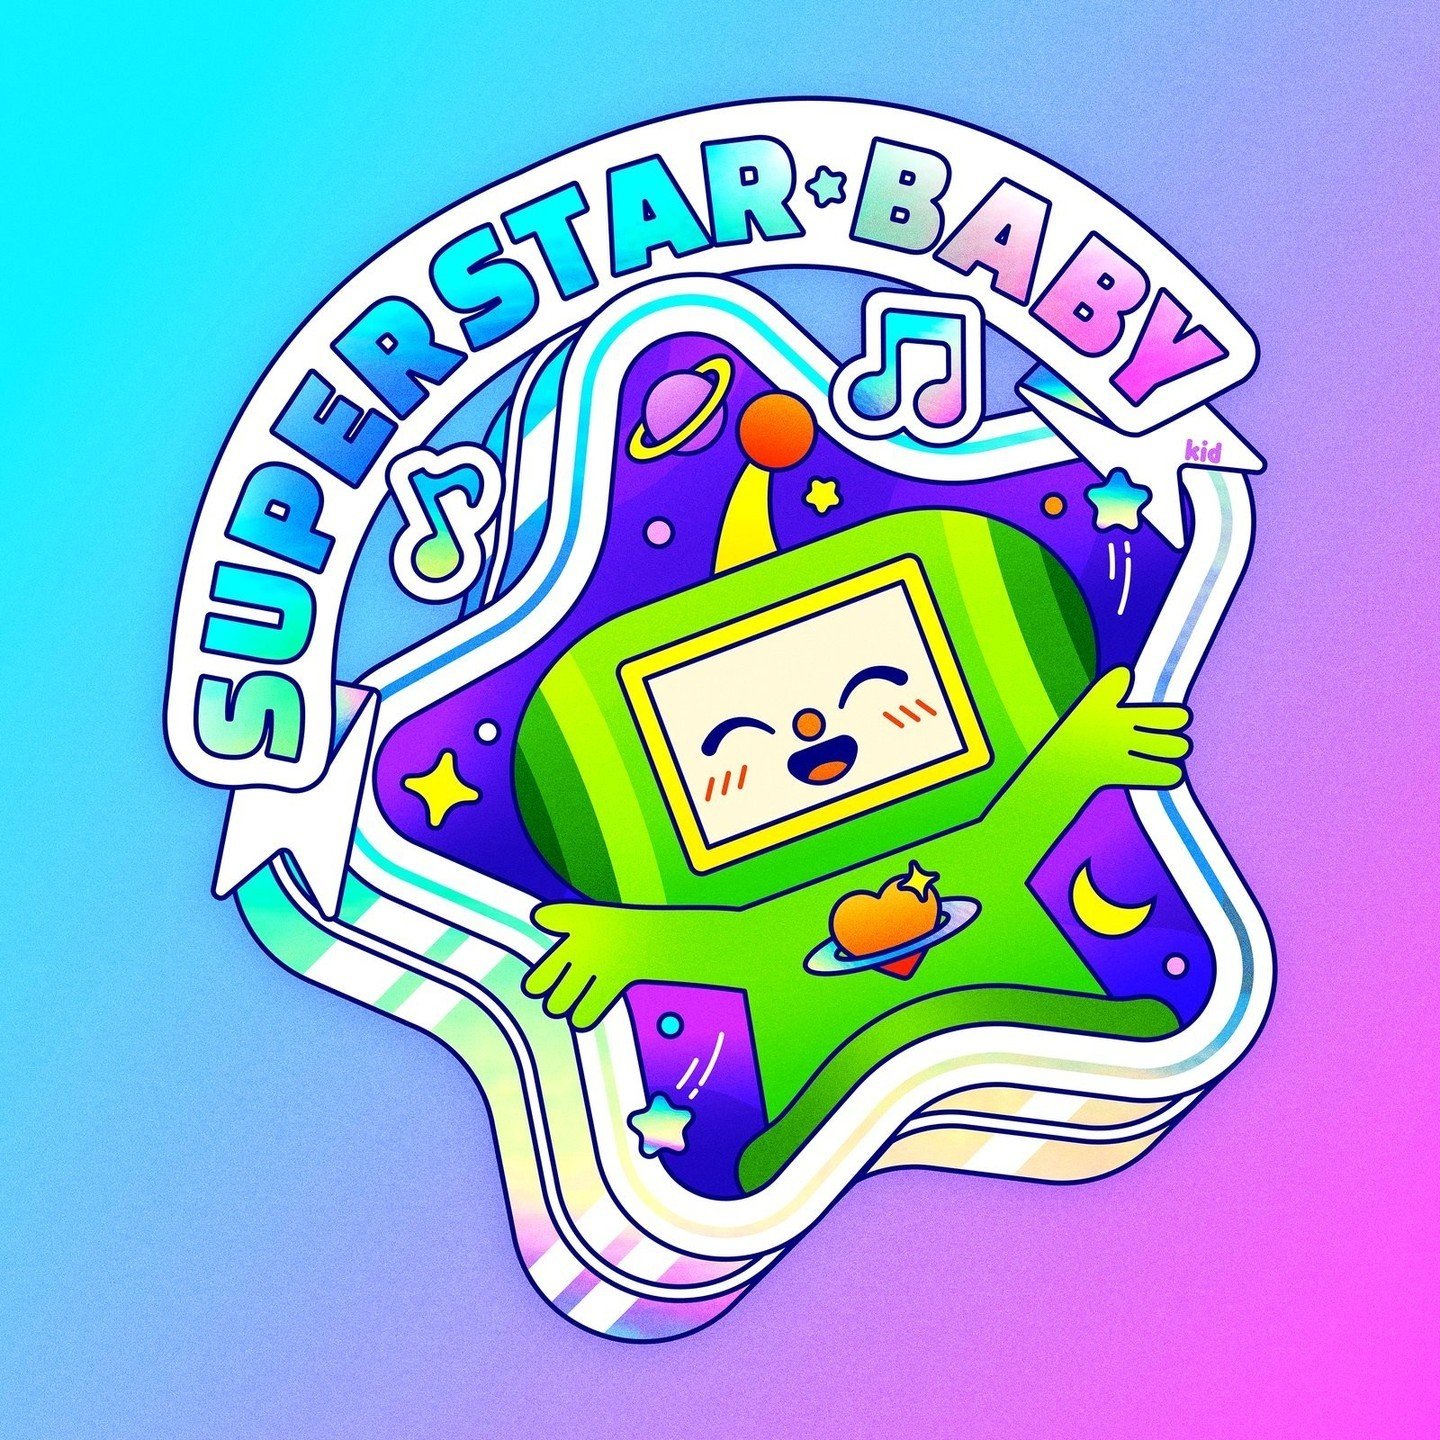 You're a superstar baby 💫⁠
⁠
Happy 20th birthday Katamari Damacy 🥳 Here's the final holographic design from my reel a few weeks back! I literally can't wait for these babies to be done printing @stickerninja 😍⁠
⁠
✨ 🌍 ✨⁠
⁠
#katamaridamacy #digital